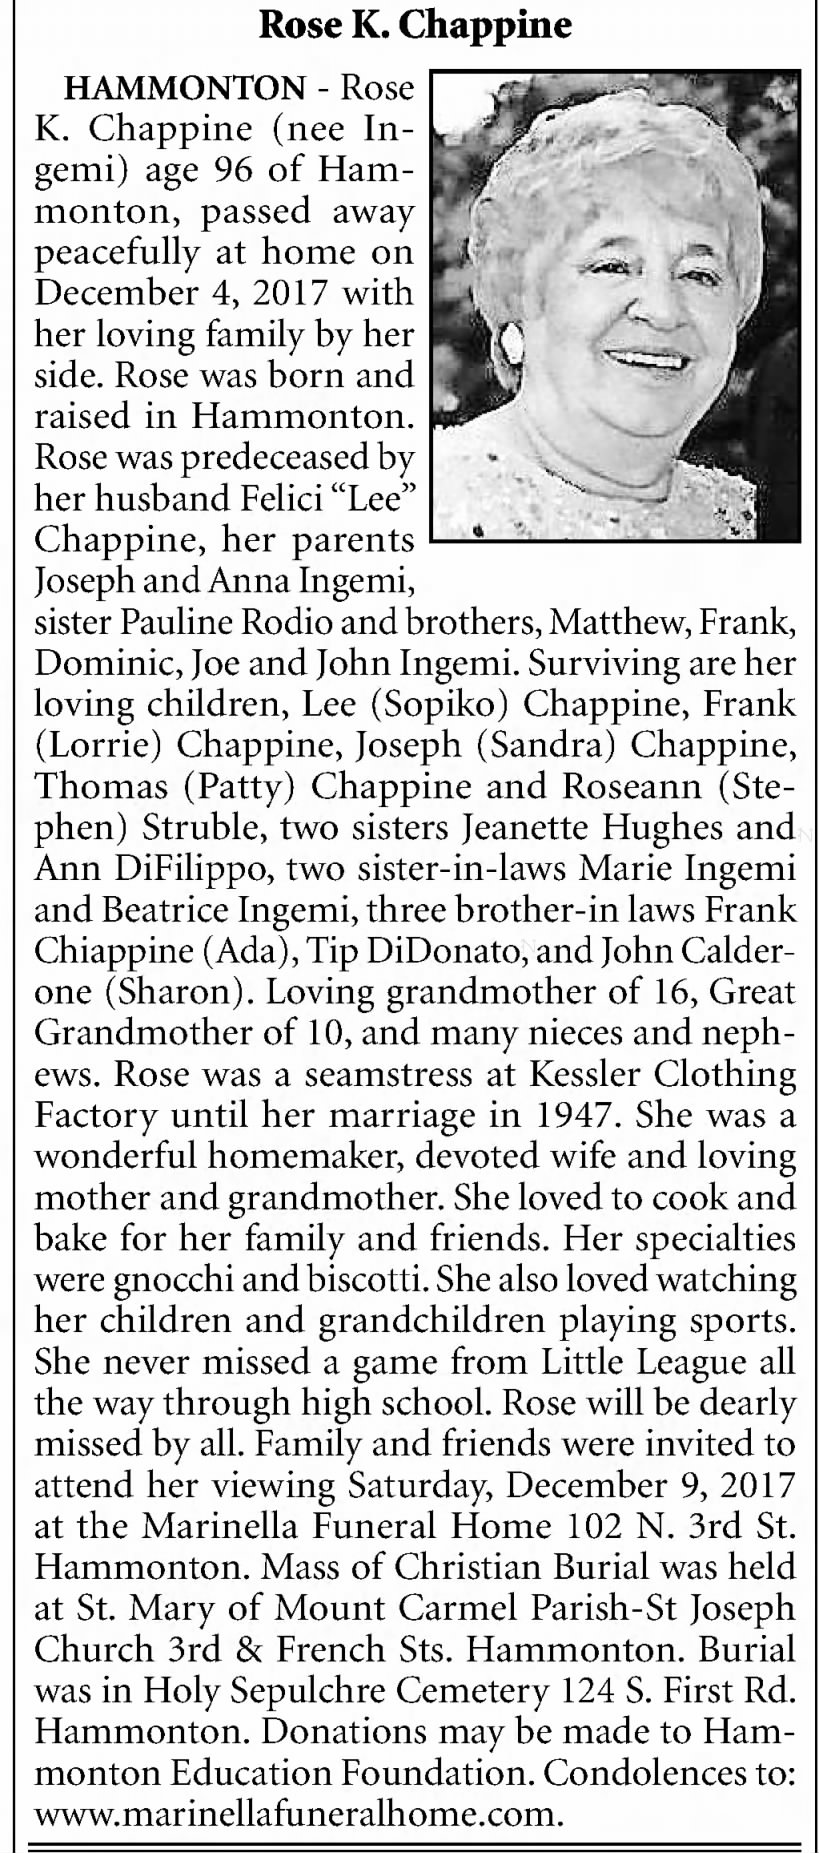 Obituary for Rose K. Chappine